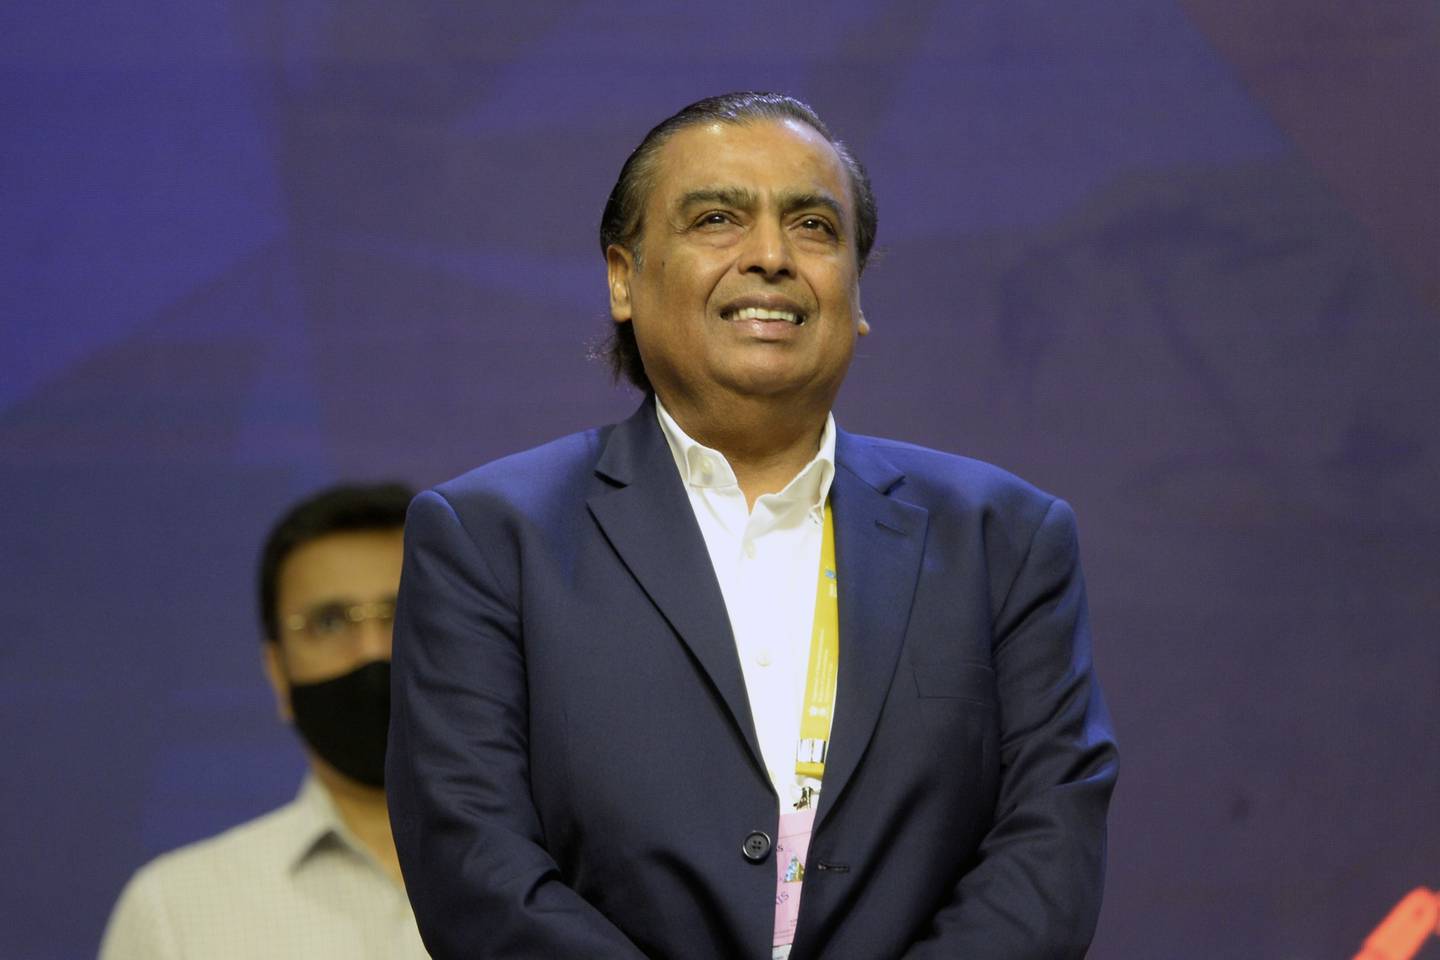 The addition of Metro's cash-and-carry business strengthens billionaire Mukesh Ambani's Reliance.  Reliance is already India's largest brick-and-mortar retailer.bloomberg